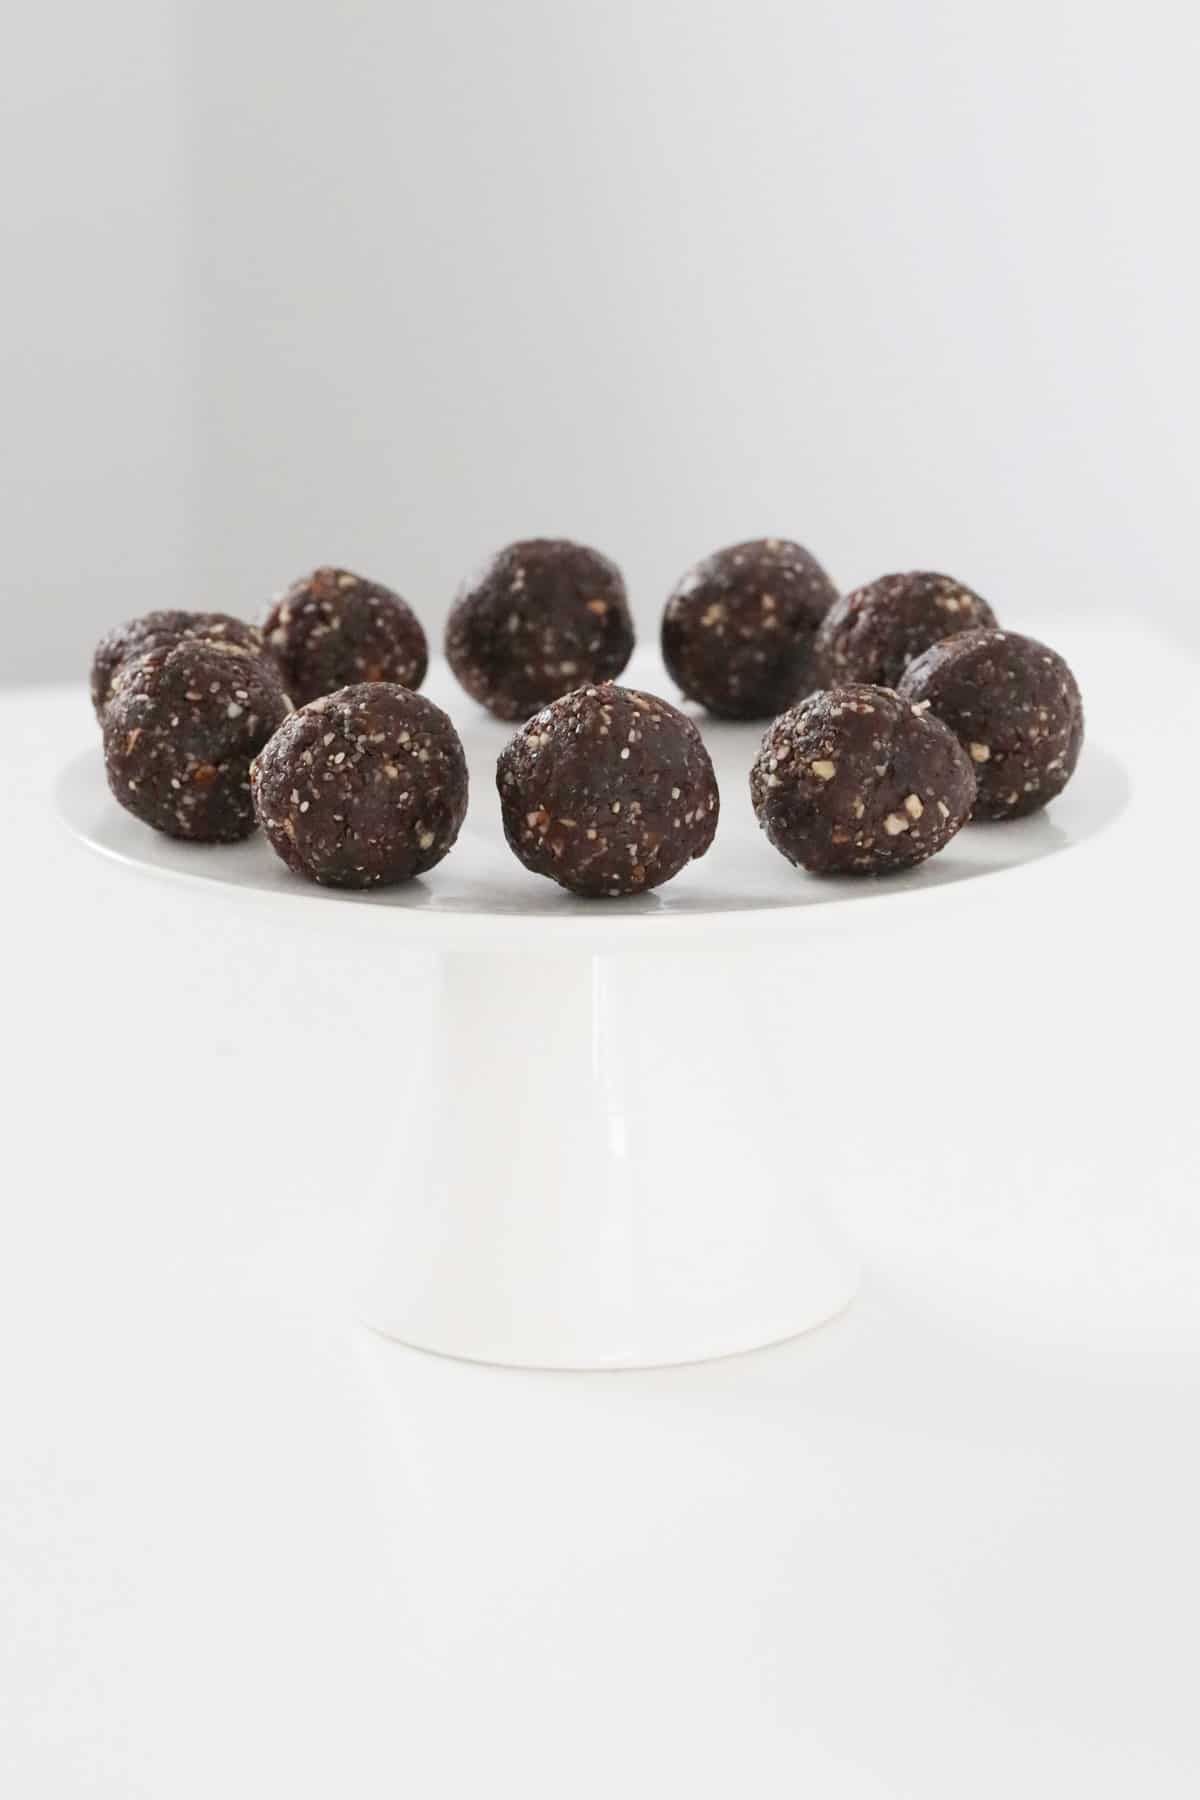 A plate of nutty chocolate protein balls.